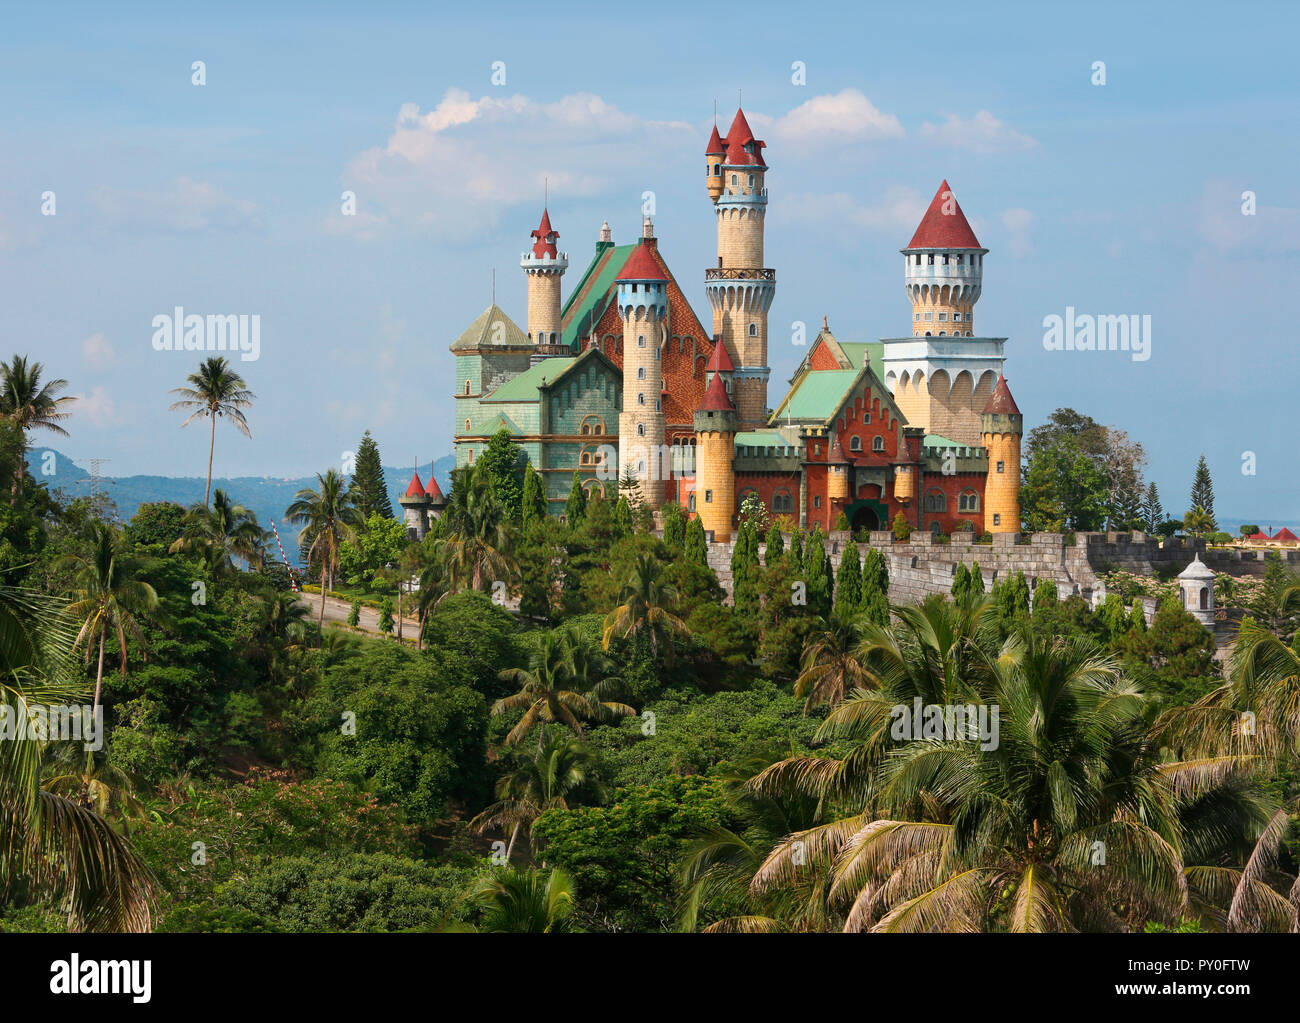 Palm trees in front of Fantasy World castle in Lemery, Tagaytay, Batangas, Philippines Stock Photo